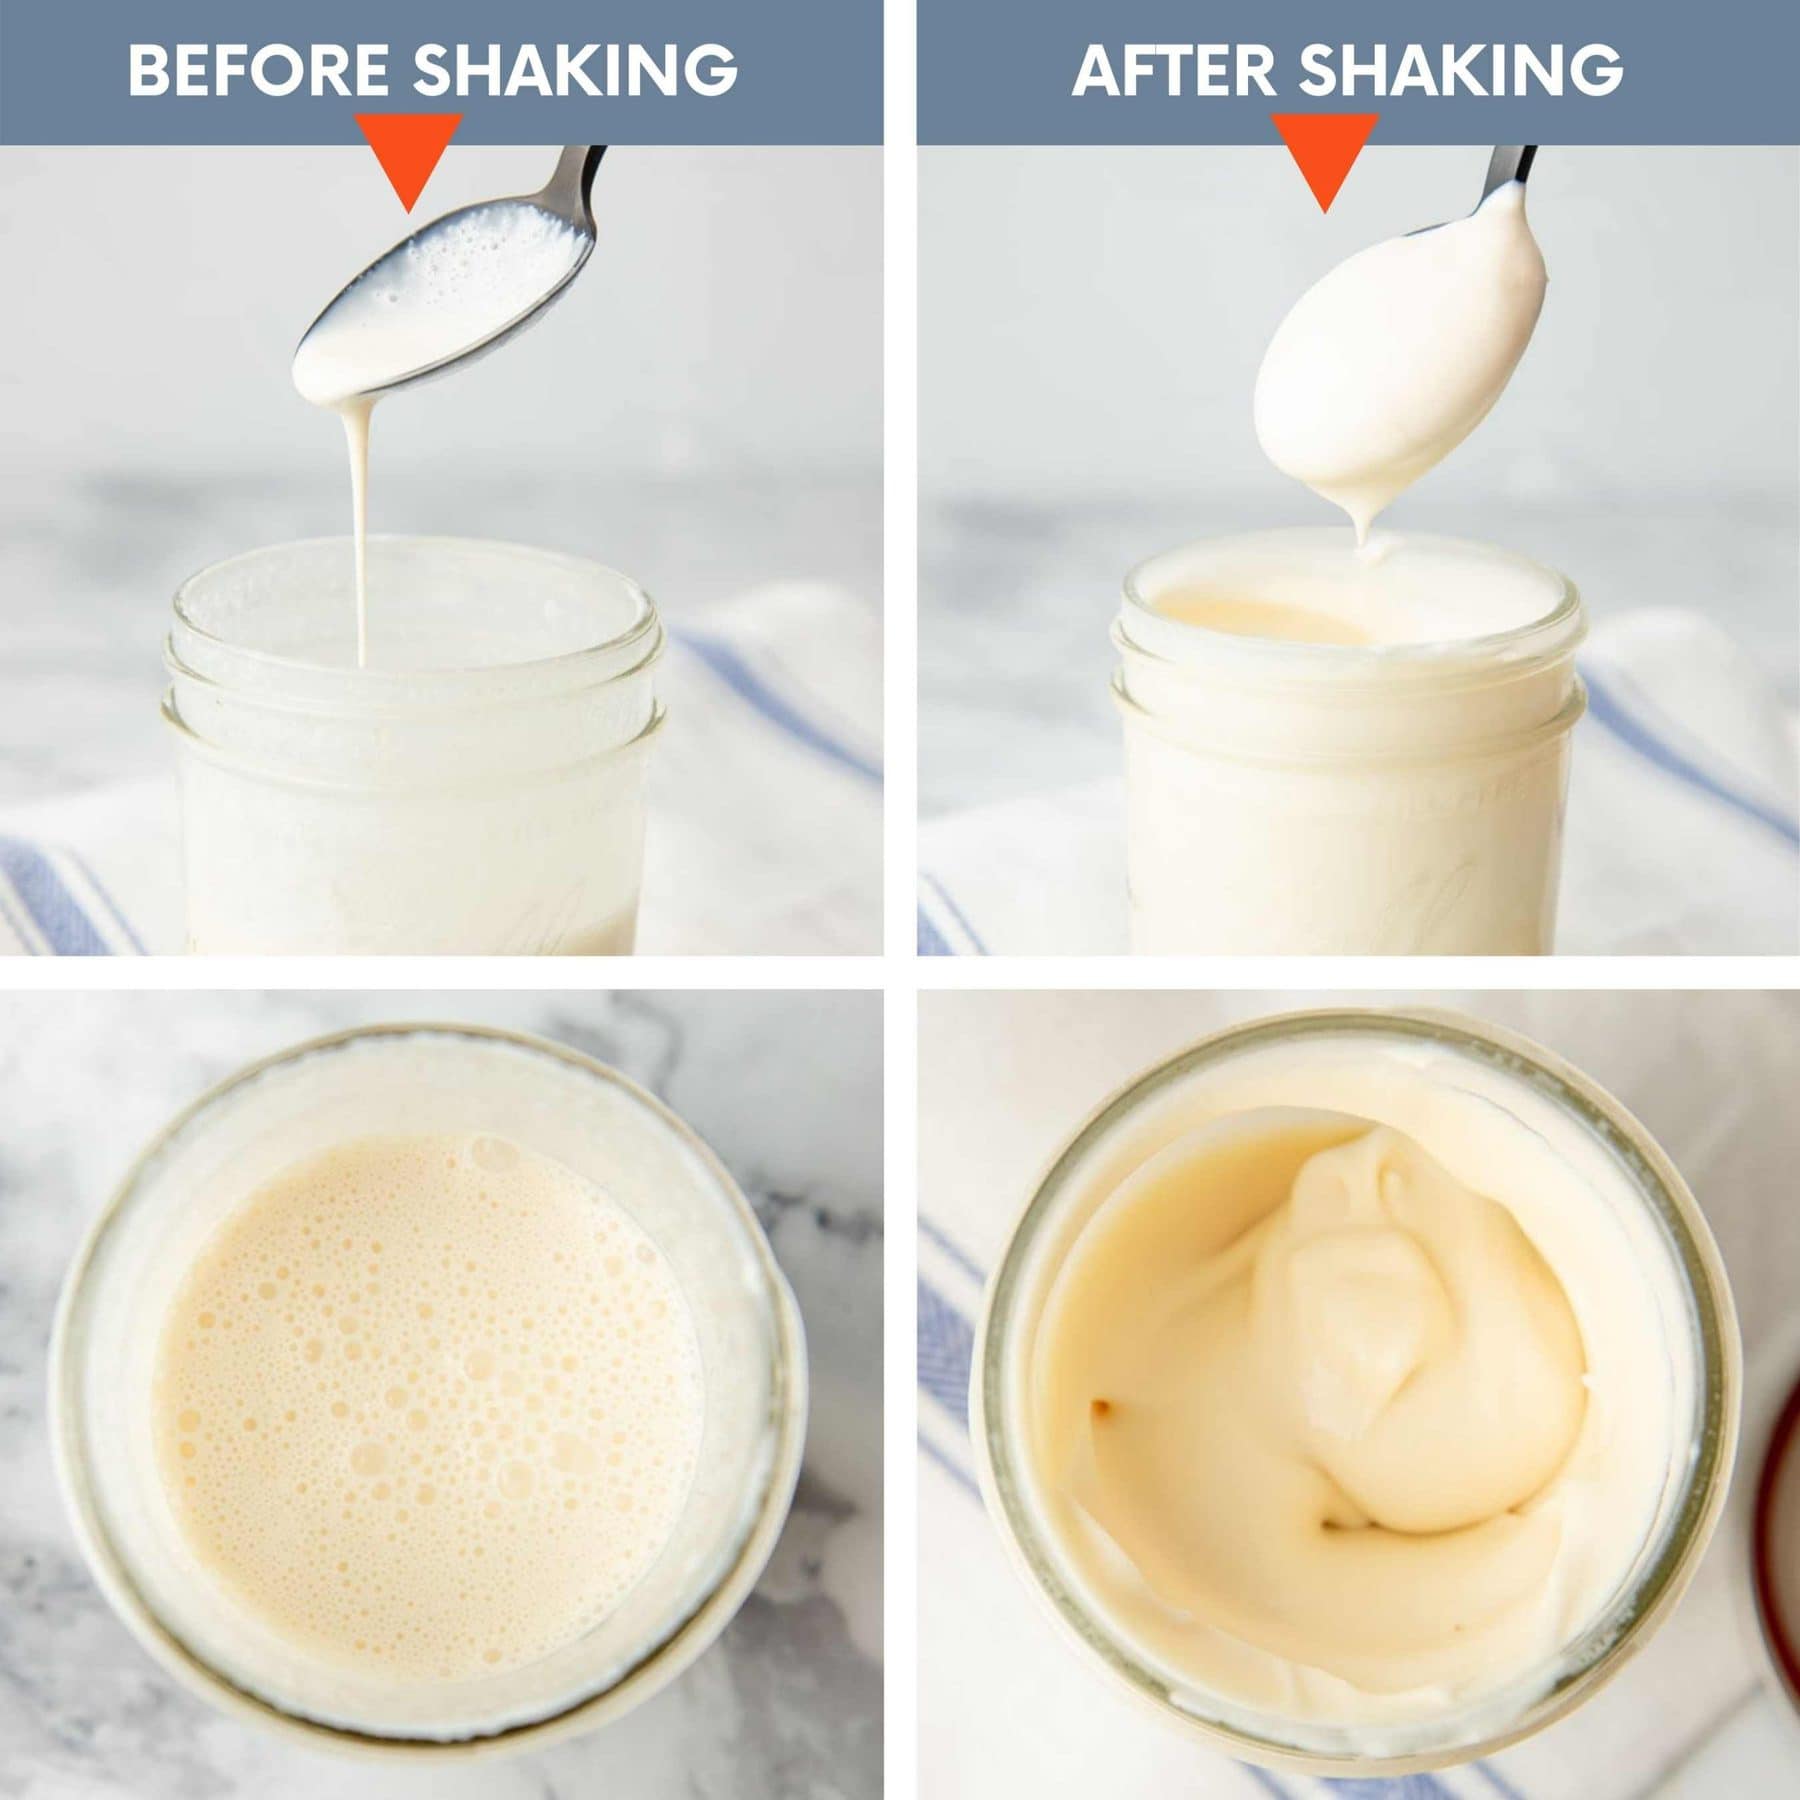 A split image shows what mason jar ice cream should look like before and after shaking.